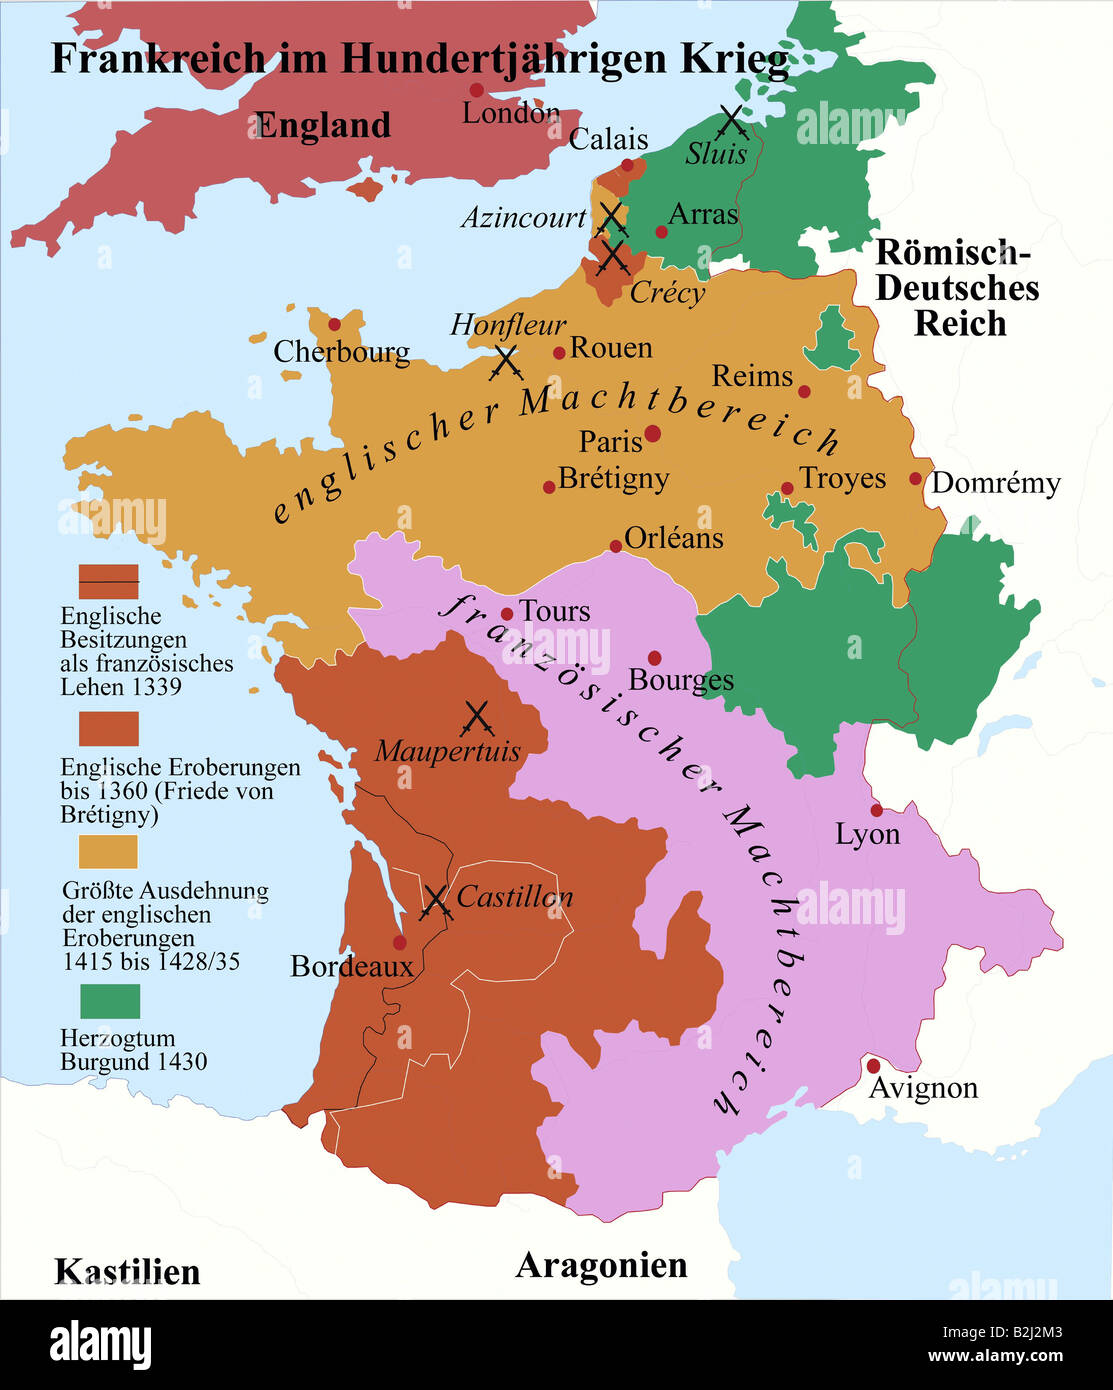 carthography, historical maps, Middle Ages, France, Hundred Years' War 1337 - 1453, Stock Photo